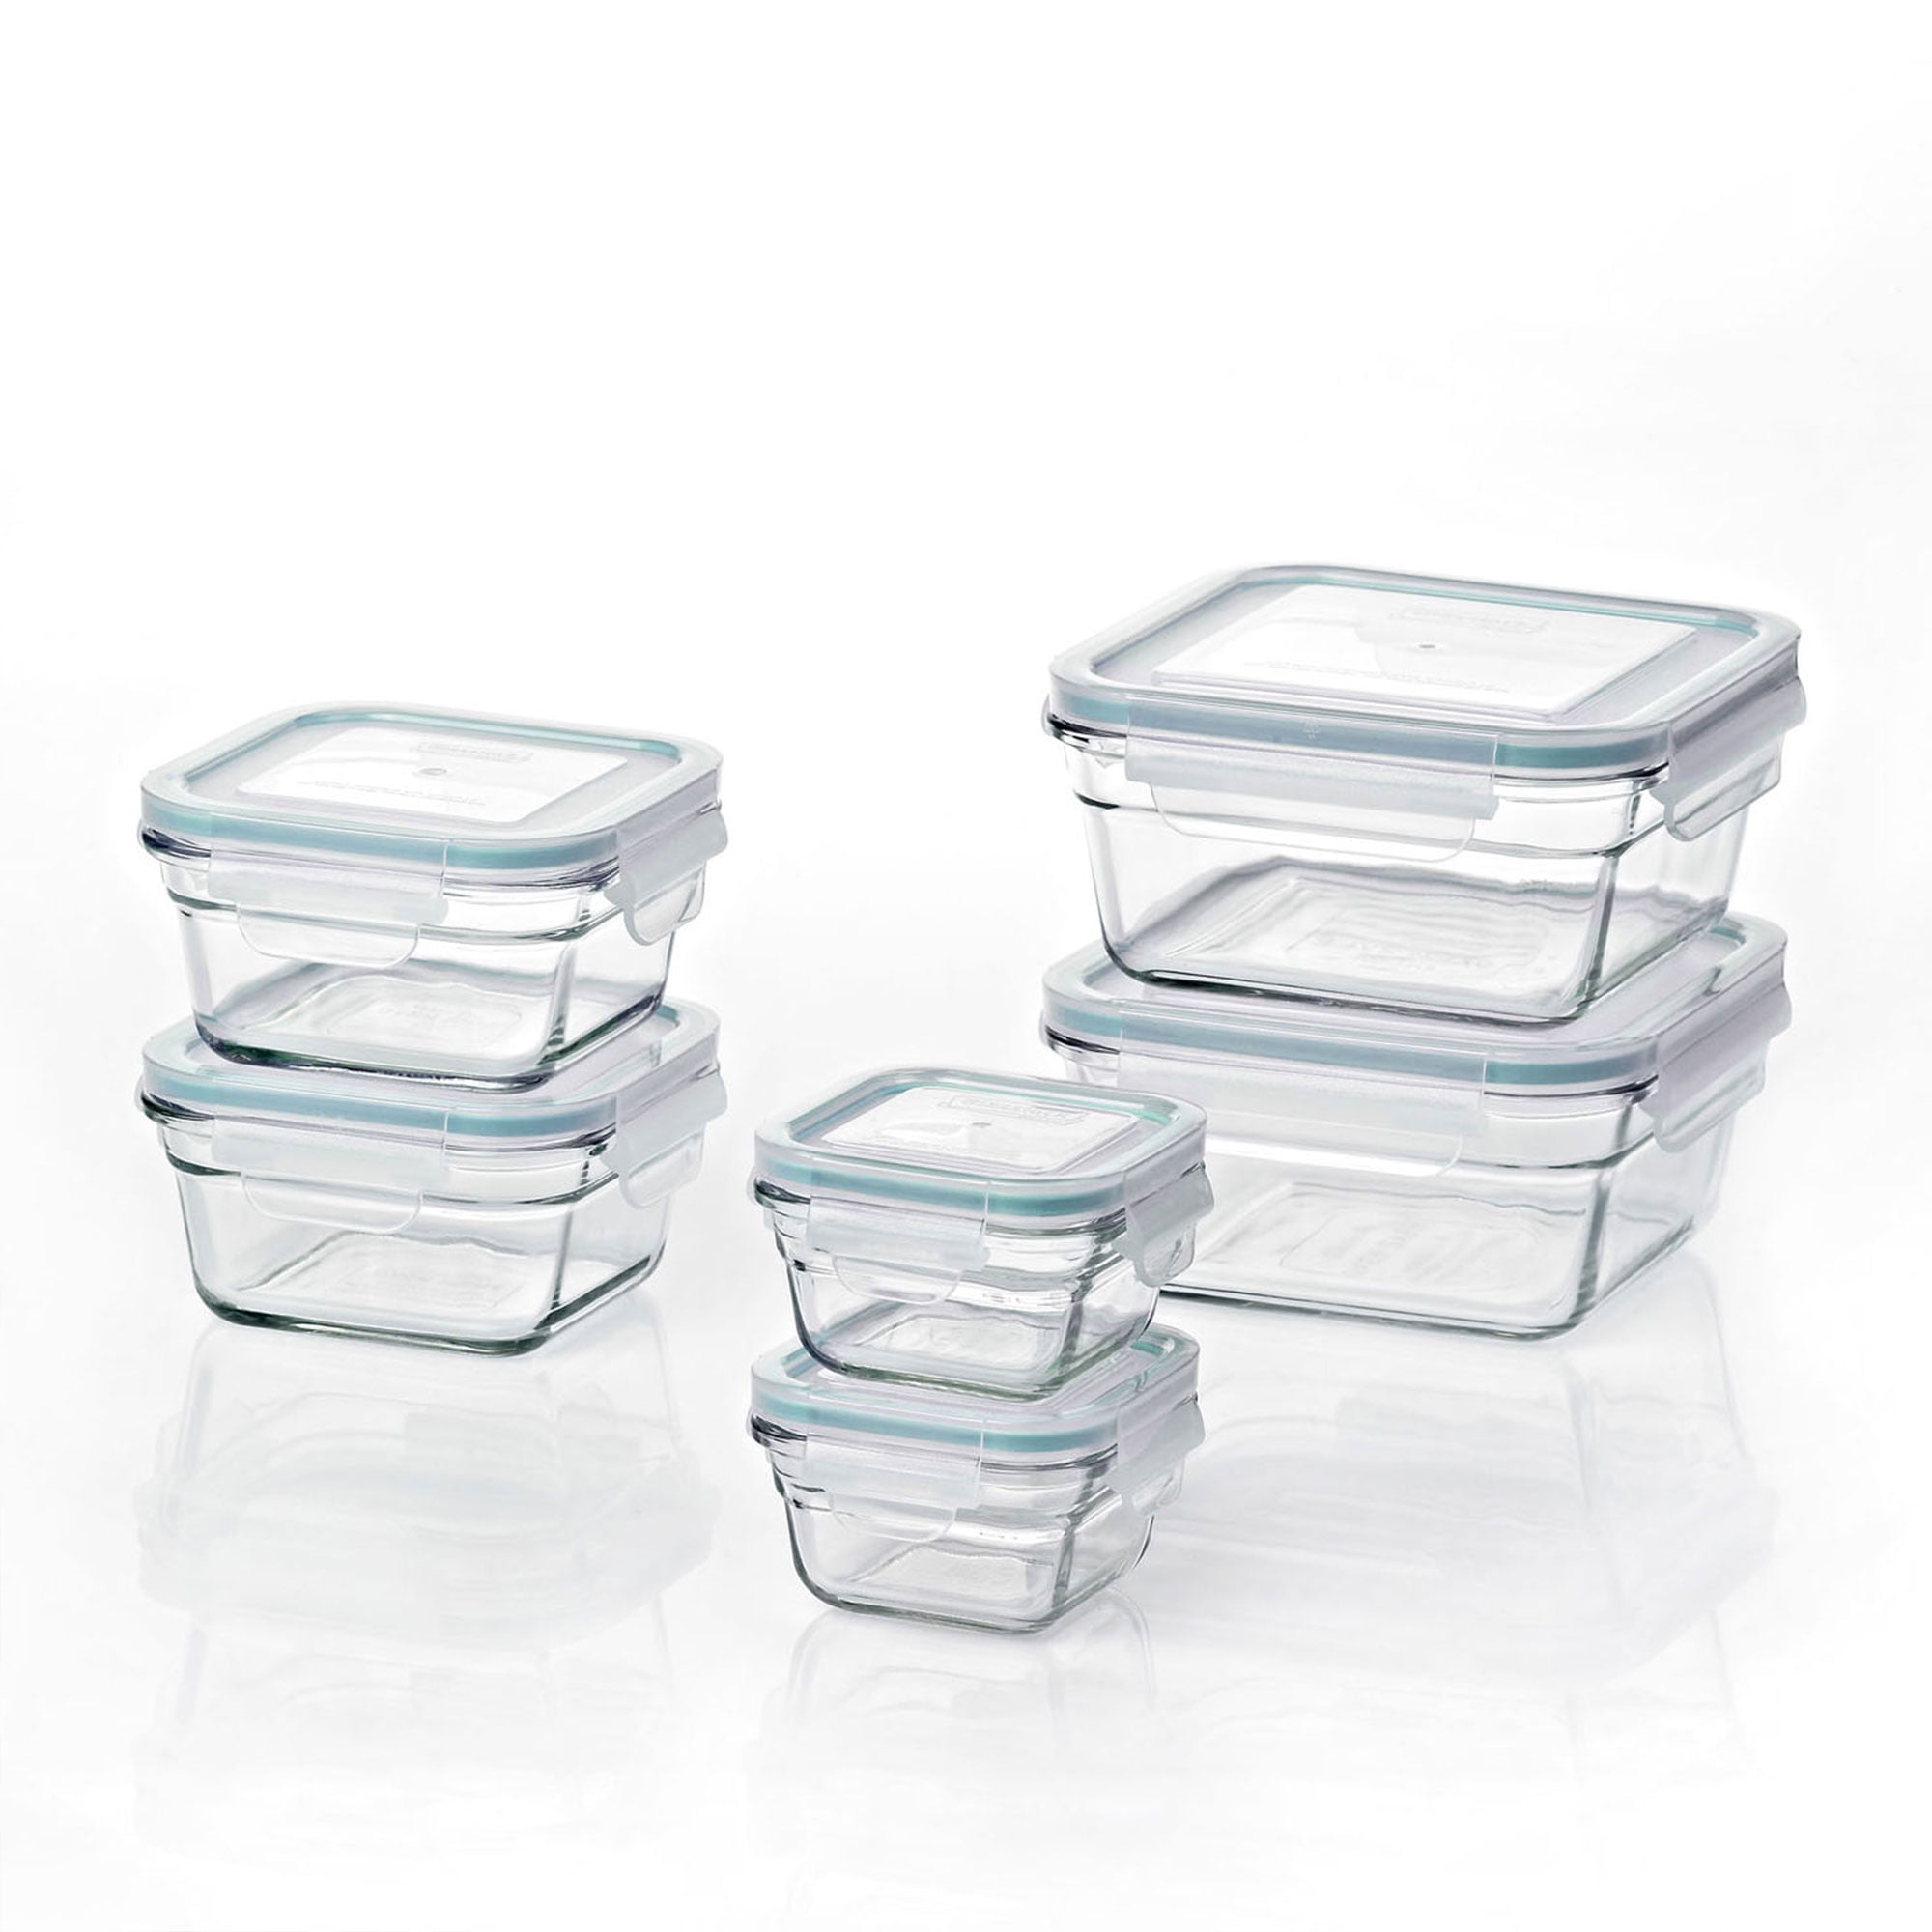 Glasslock 14 Piece Oven, Freezer, And Microwave Safe Stackable